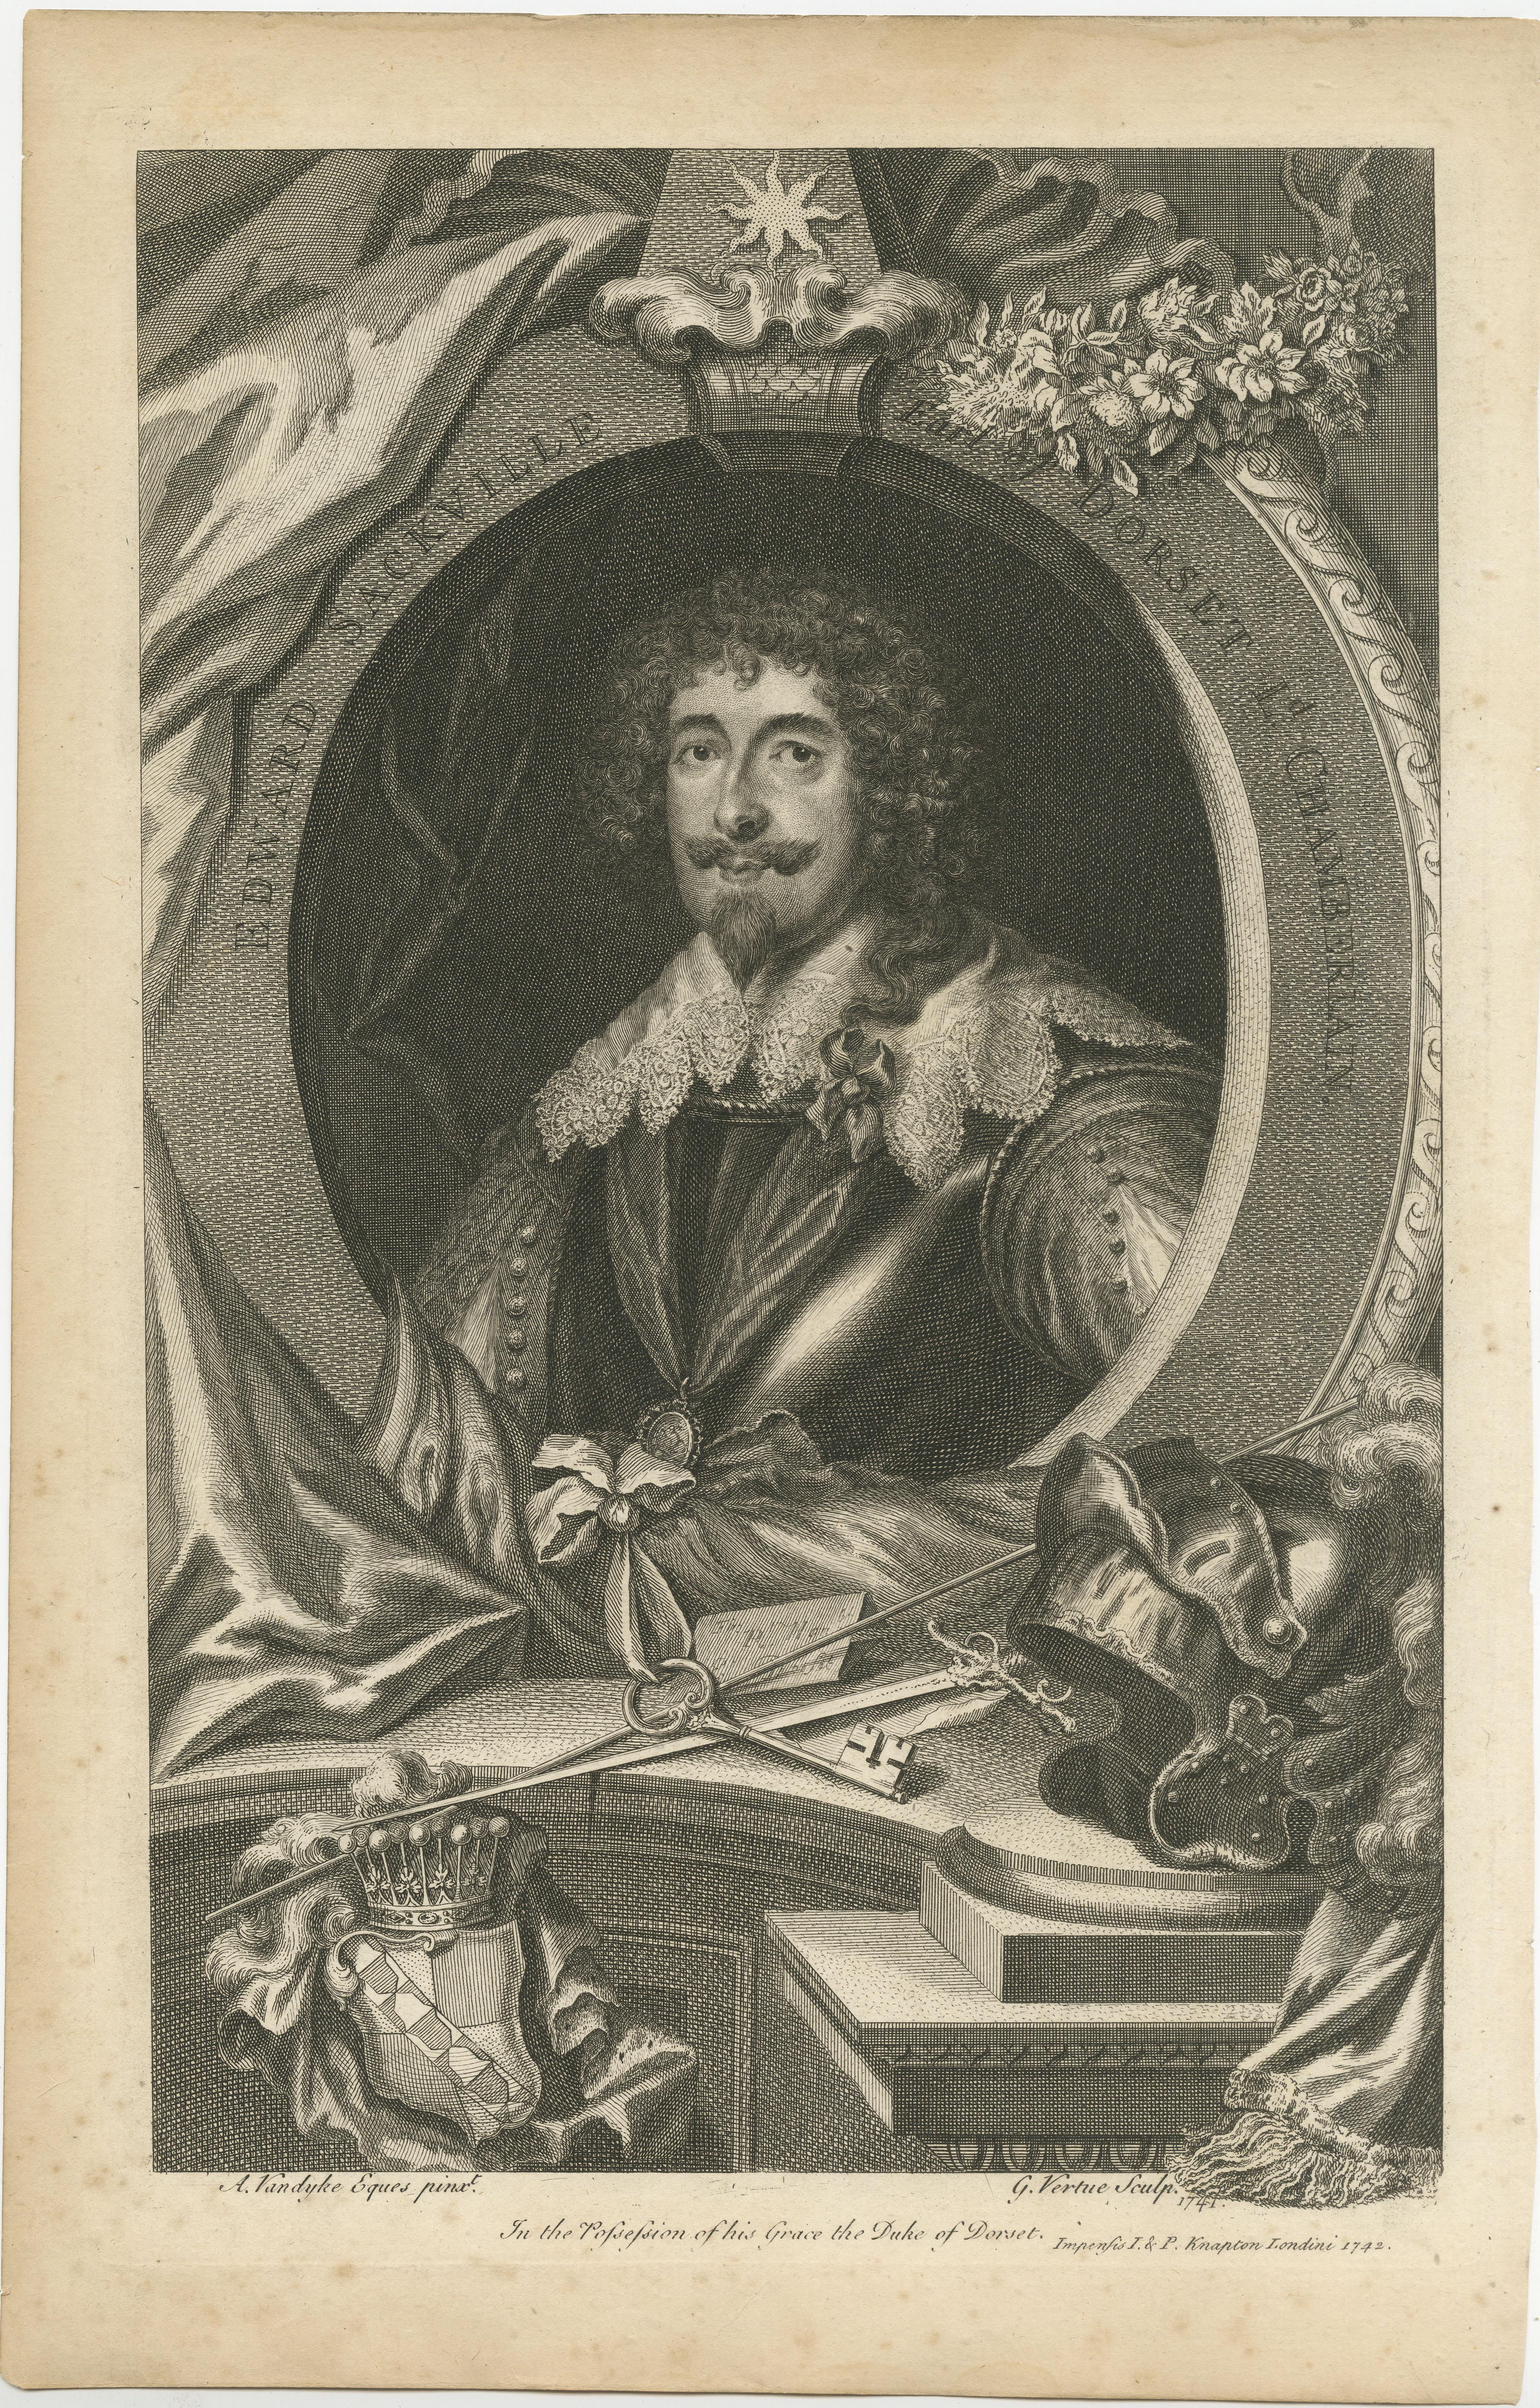 Antique portrait titled 'Edward Sackville Earl of Dorset Lord Chamberlain'. Edward Sackville, 4th Earl of Dorset KG (1591 – 17 July 1652) was an English courtier, soldier and politician. He sat in the House of Commons from 1621 to 1622 and became